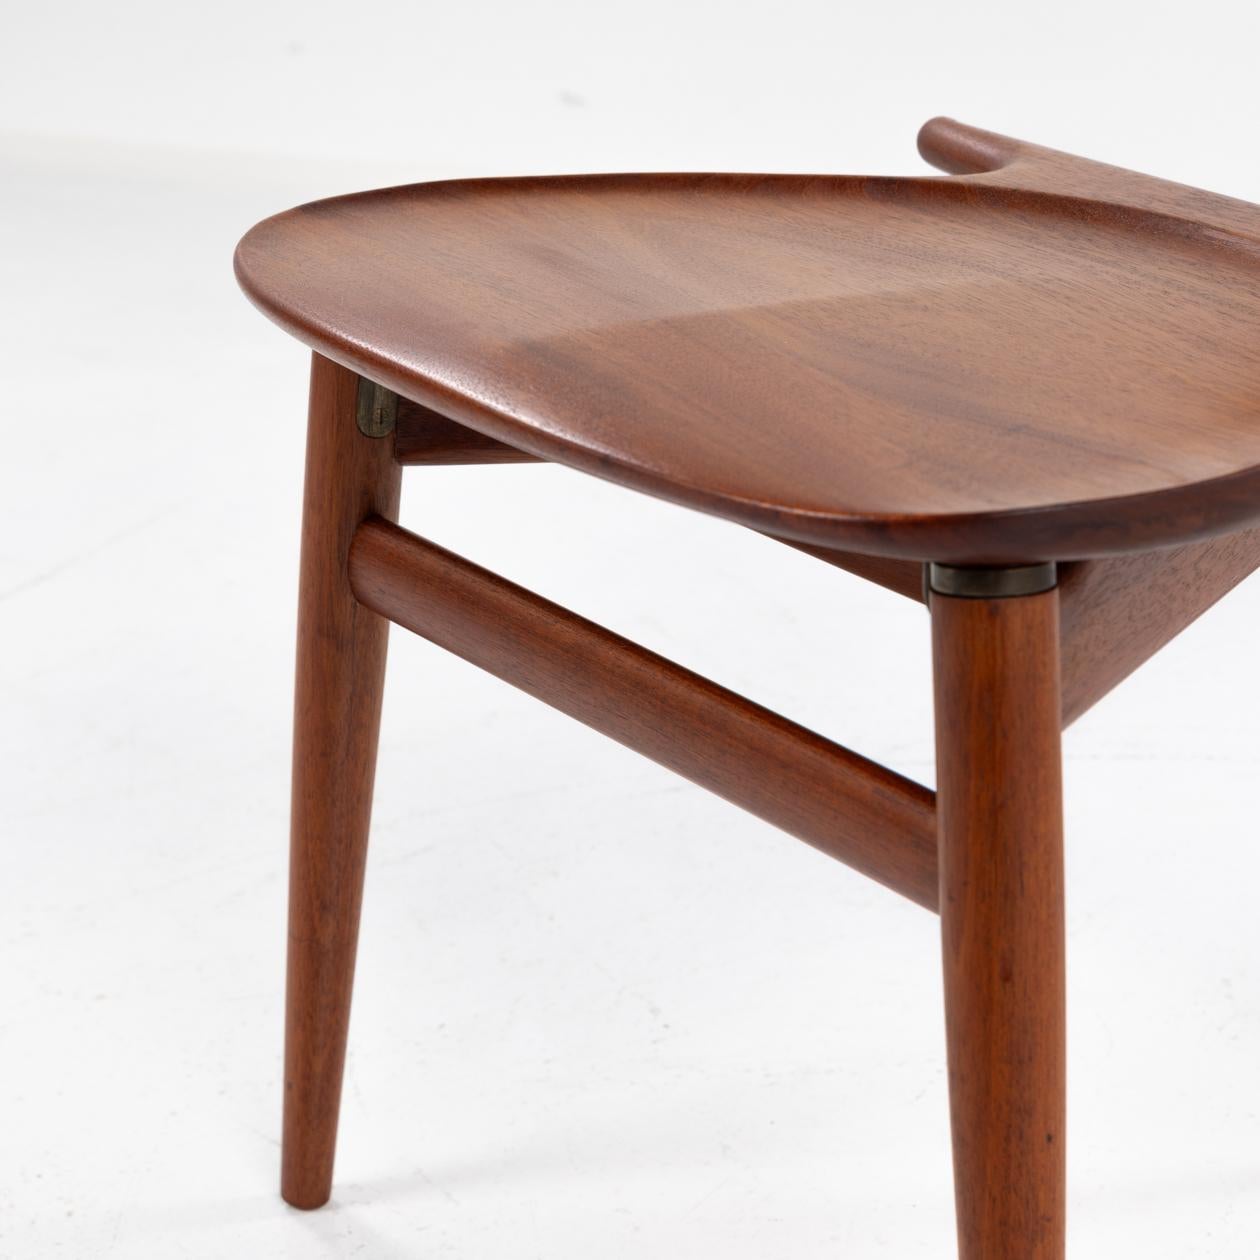 Mahogany JH 540 - The Valet Chair in solid mahogany by Hans Wegner For Sale